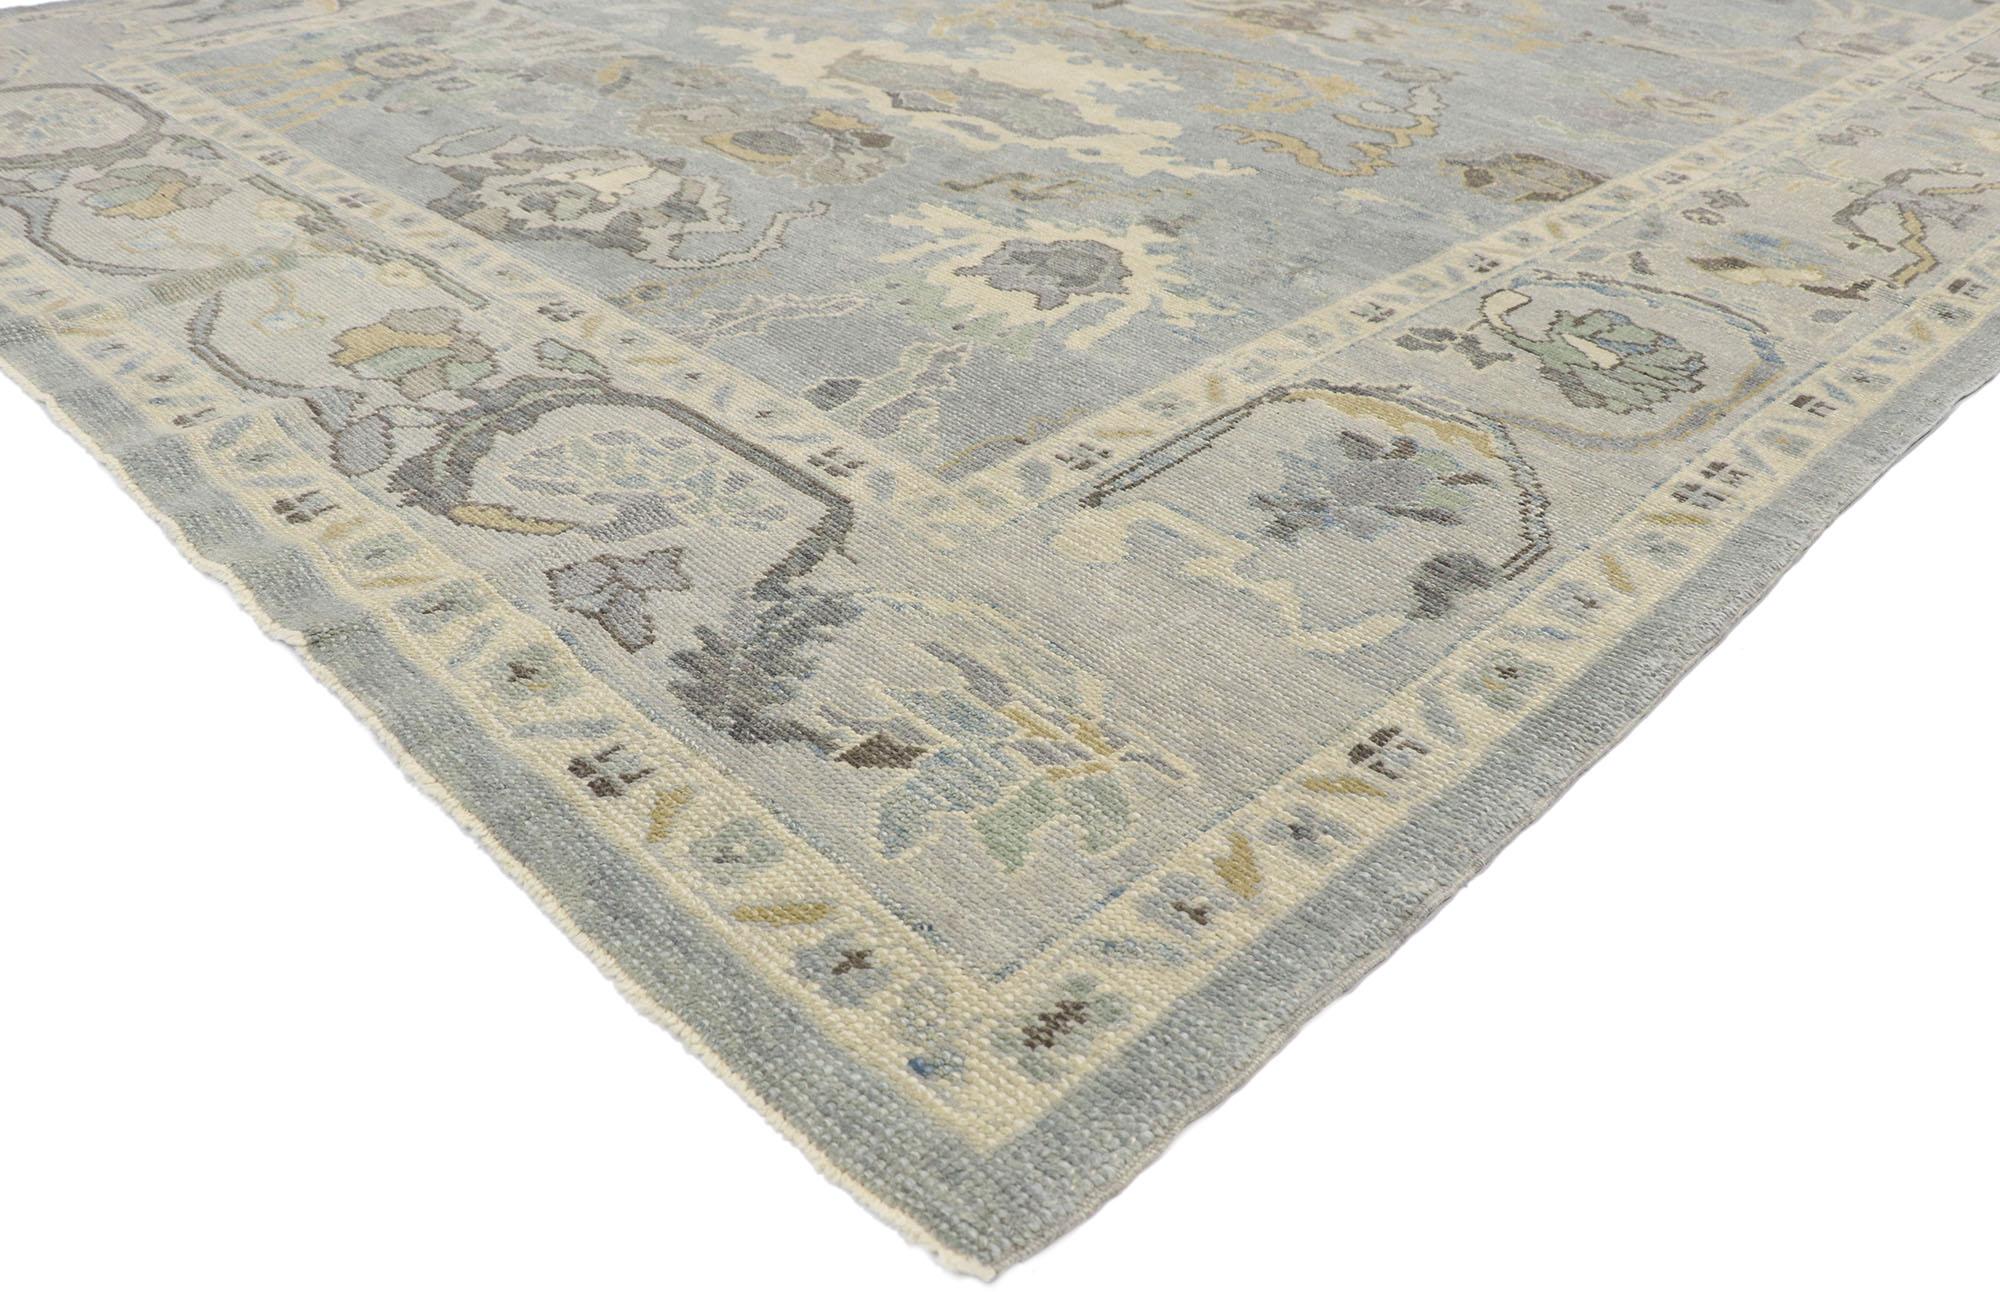 53491, new contemporary Turkish Oushak rug with Transitional Coastal style. Understated elegance combined with cool gray hues and blue undertones, this hand-knotted wool contemporary Turkish Oushak rug creates an inimitable warmth and calming